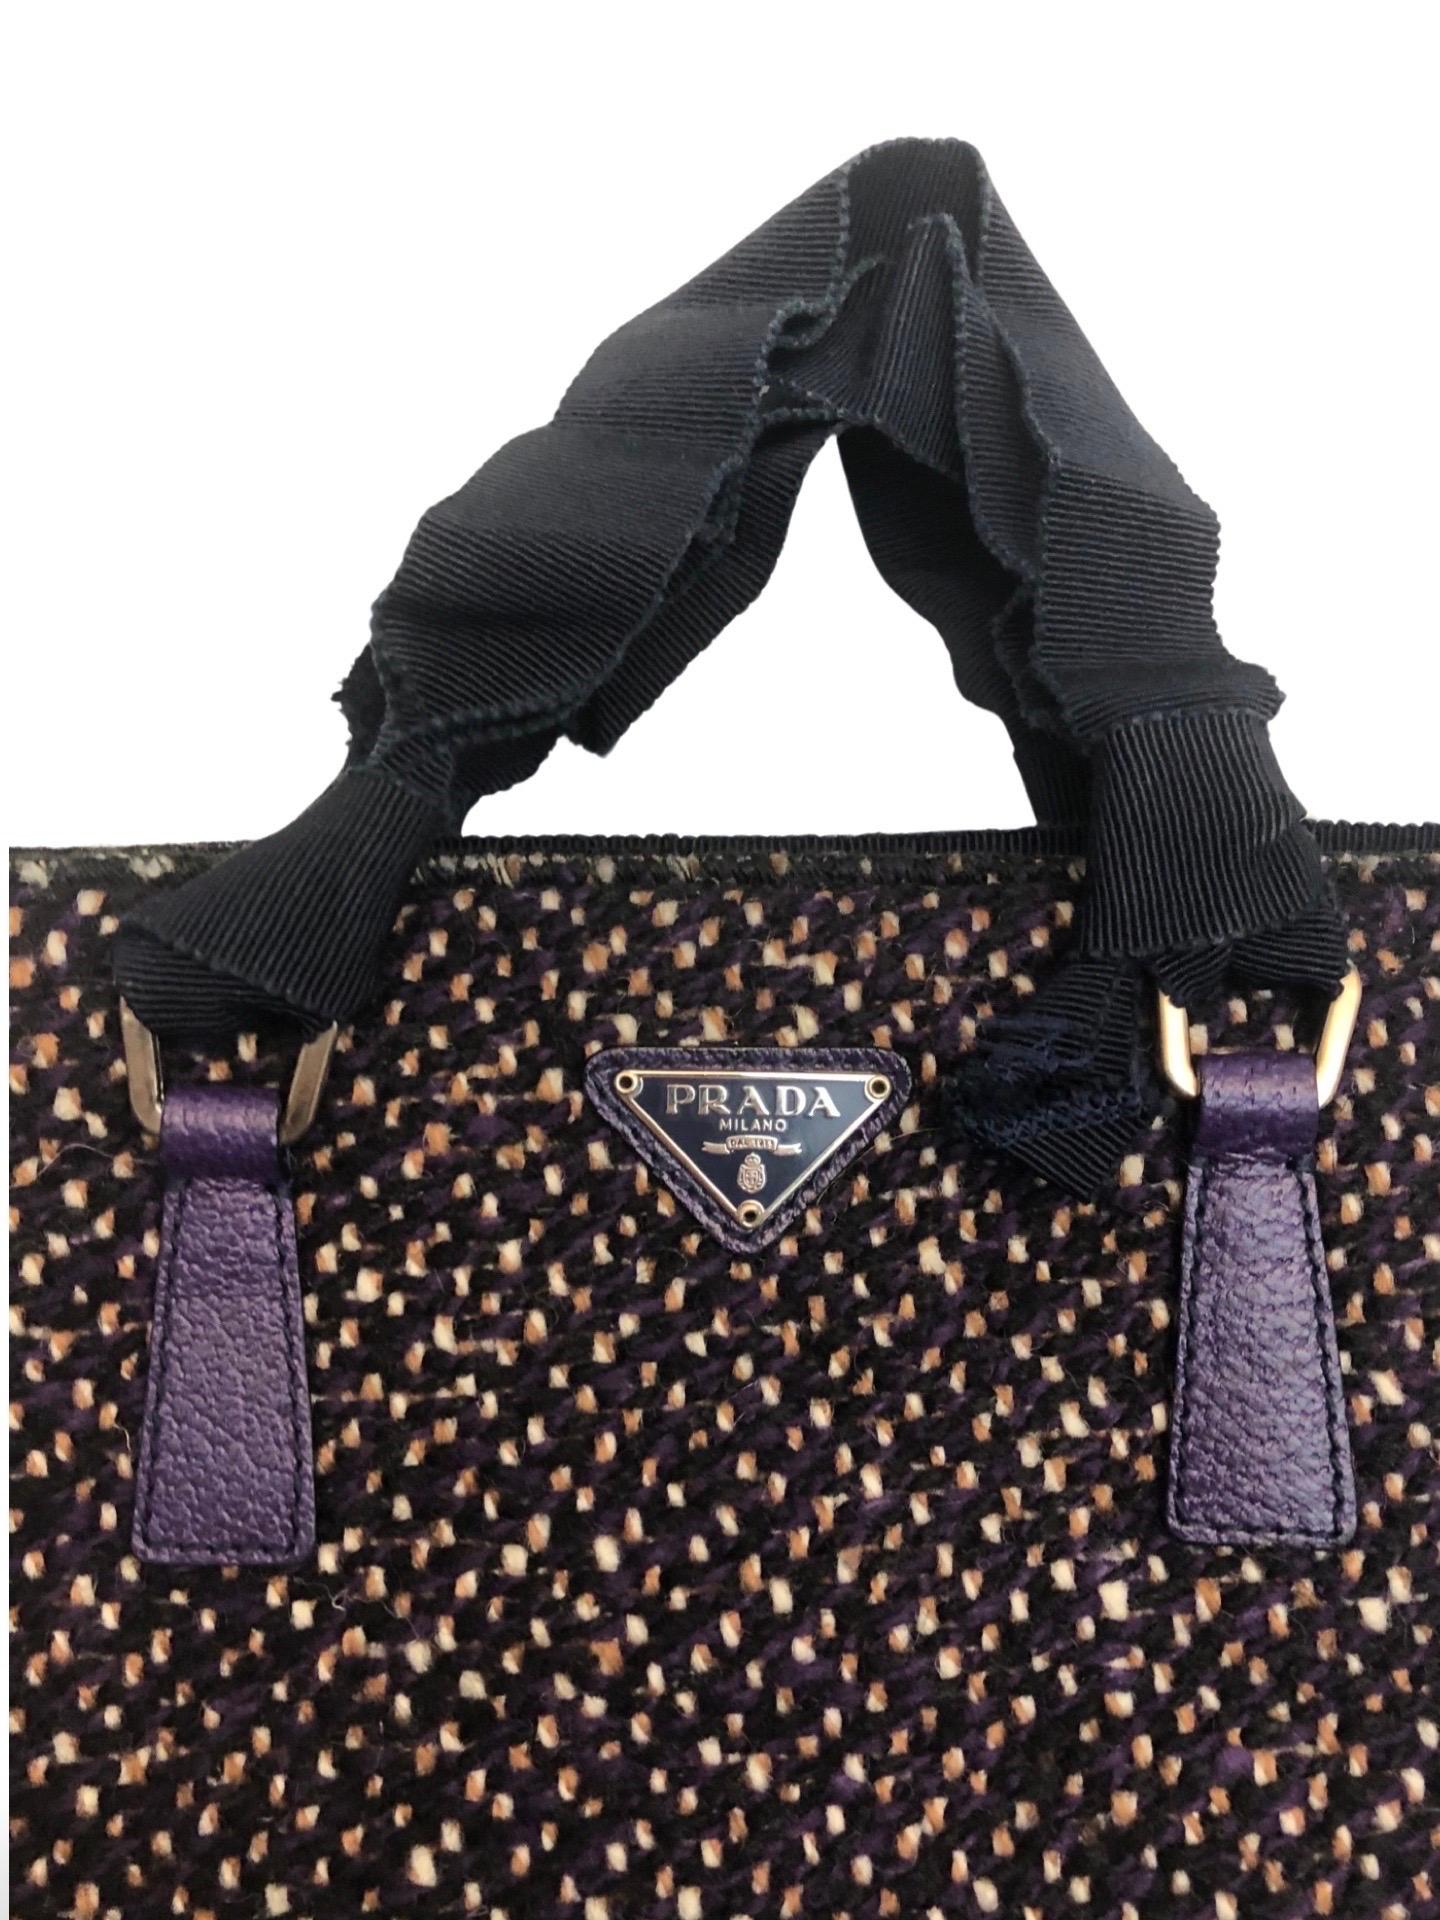 - Purple leather and wool tweed mixed tote bag is rarely seen to be made in Prada collection. The bag in excellent to mint condition. 

- Purple leather zip closure. 

- Nylon material handle. 

- Back zip pocket closure. 

- Iconic Prada logo. 

-